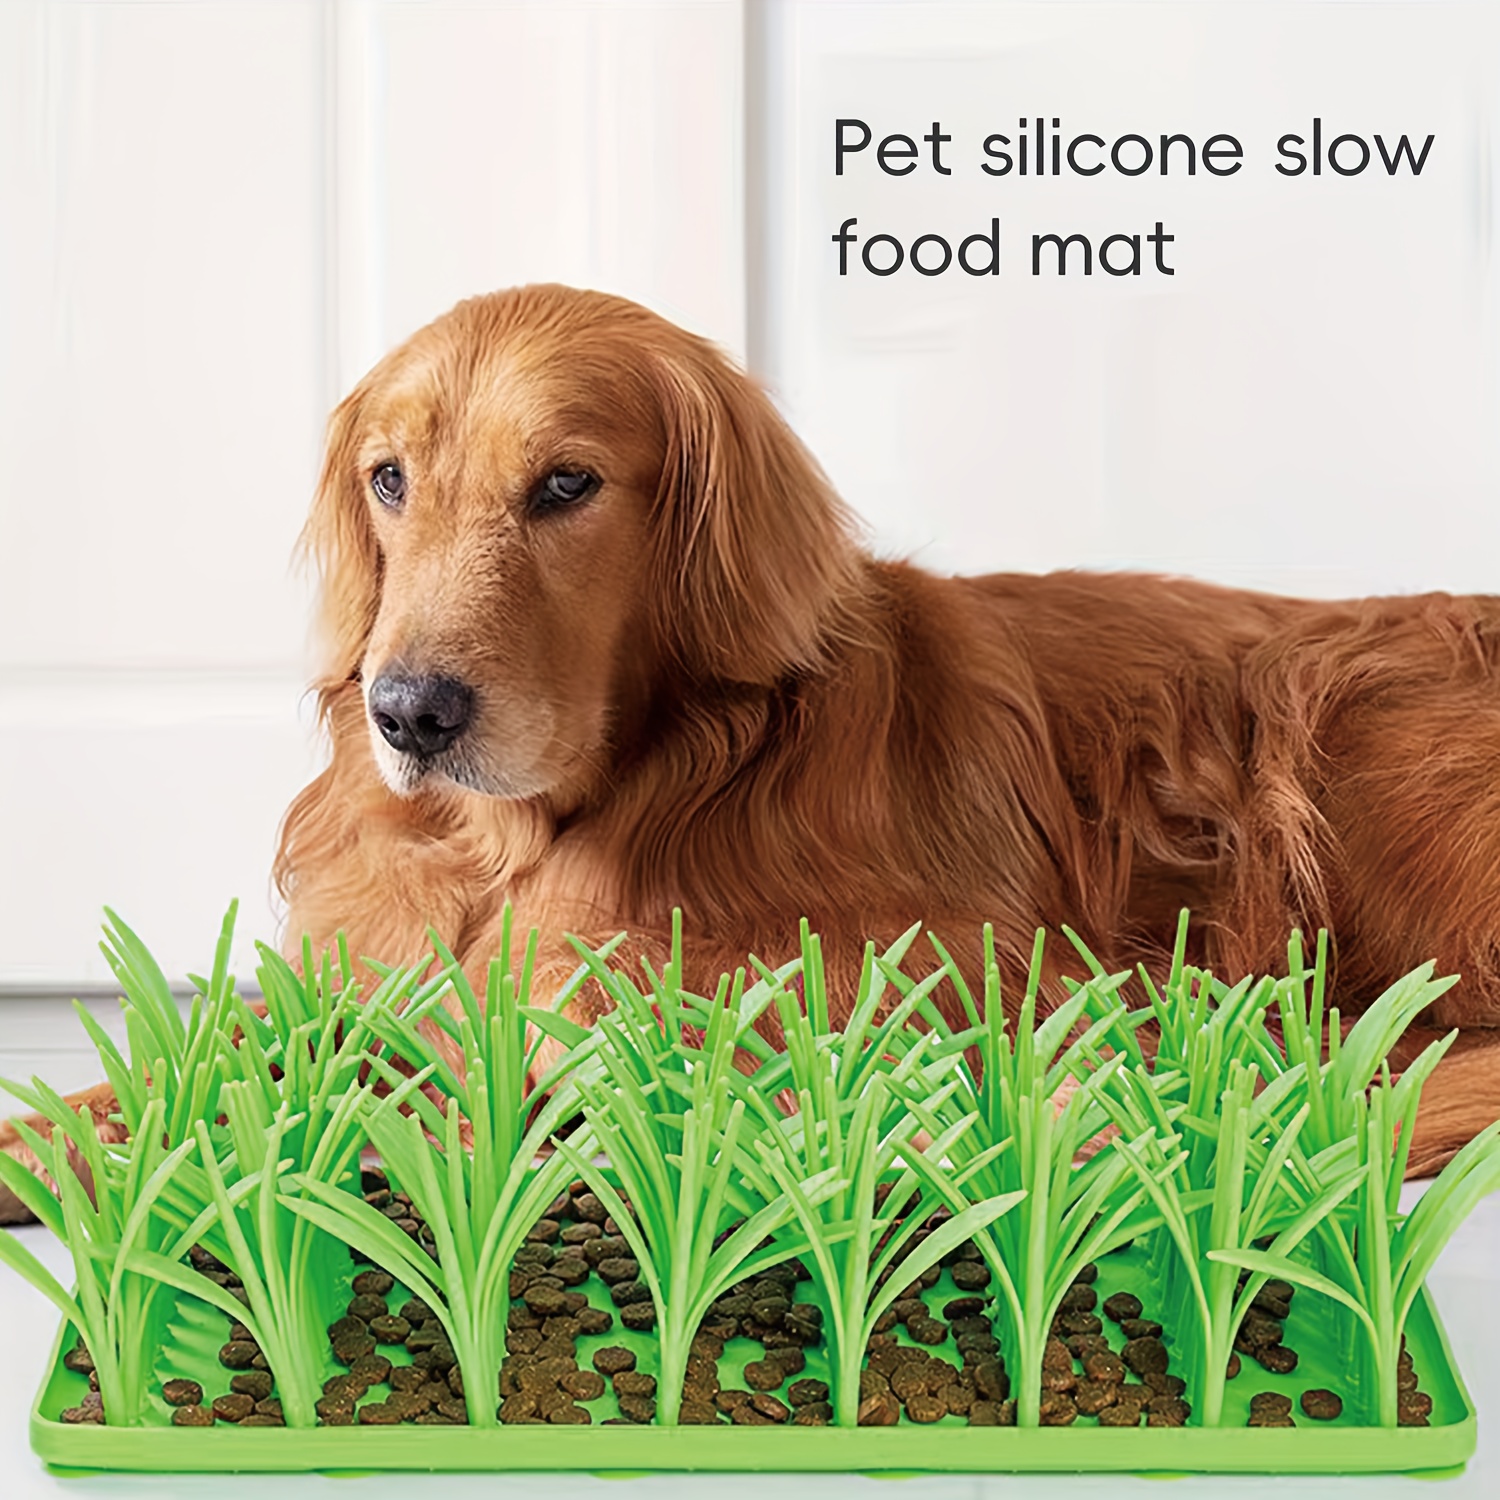 

1pc Pet Silicone Slow Food Mat, Creative Grass Design Licking Pad, Cat And Dog Eating Non-slip Slow Food Pad